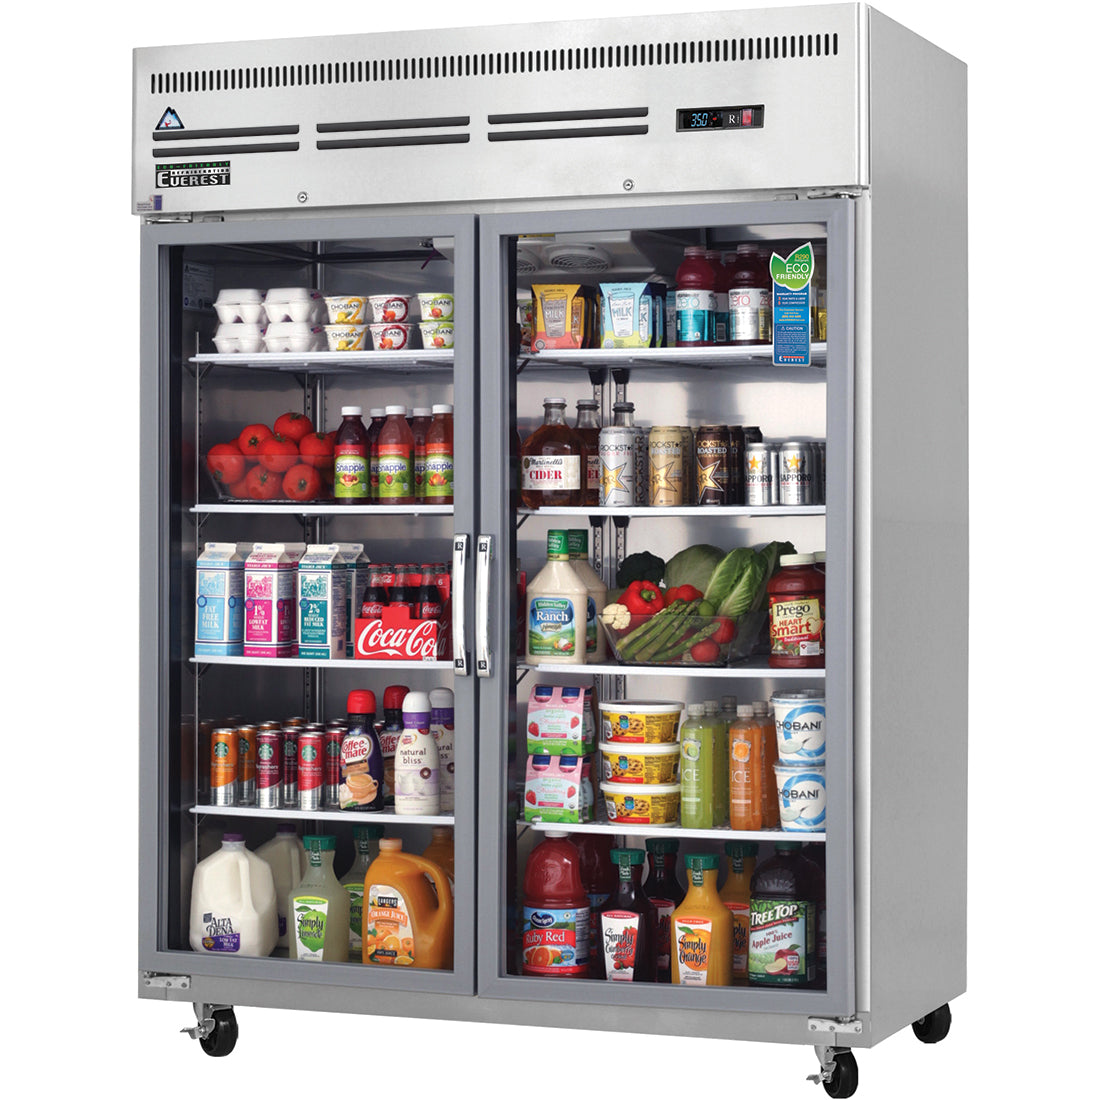 Everest ES Series-ESGWR2 Two Section Glass Door Upright Reach-In Refrigerator - 55 Cu. Ft.